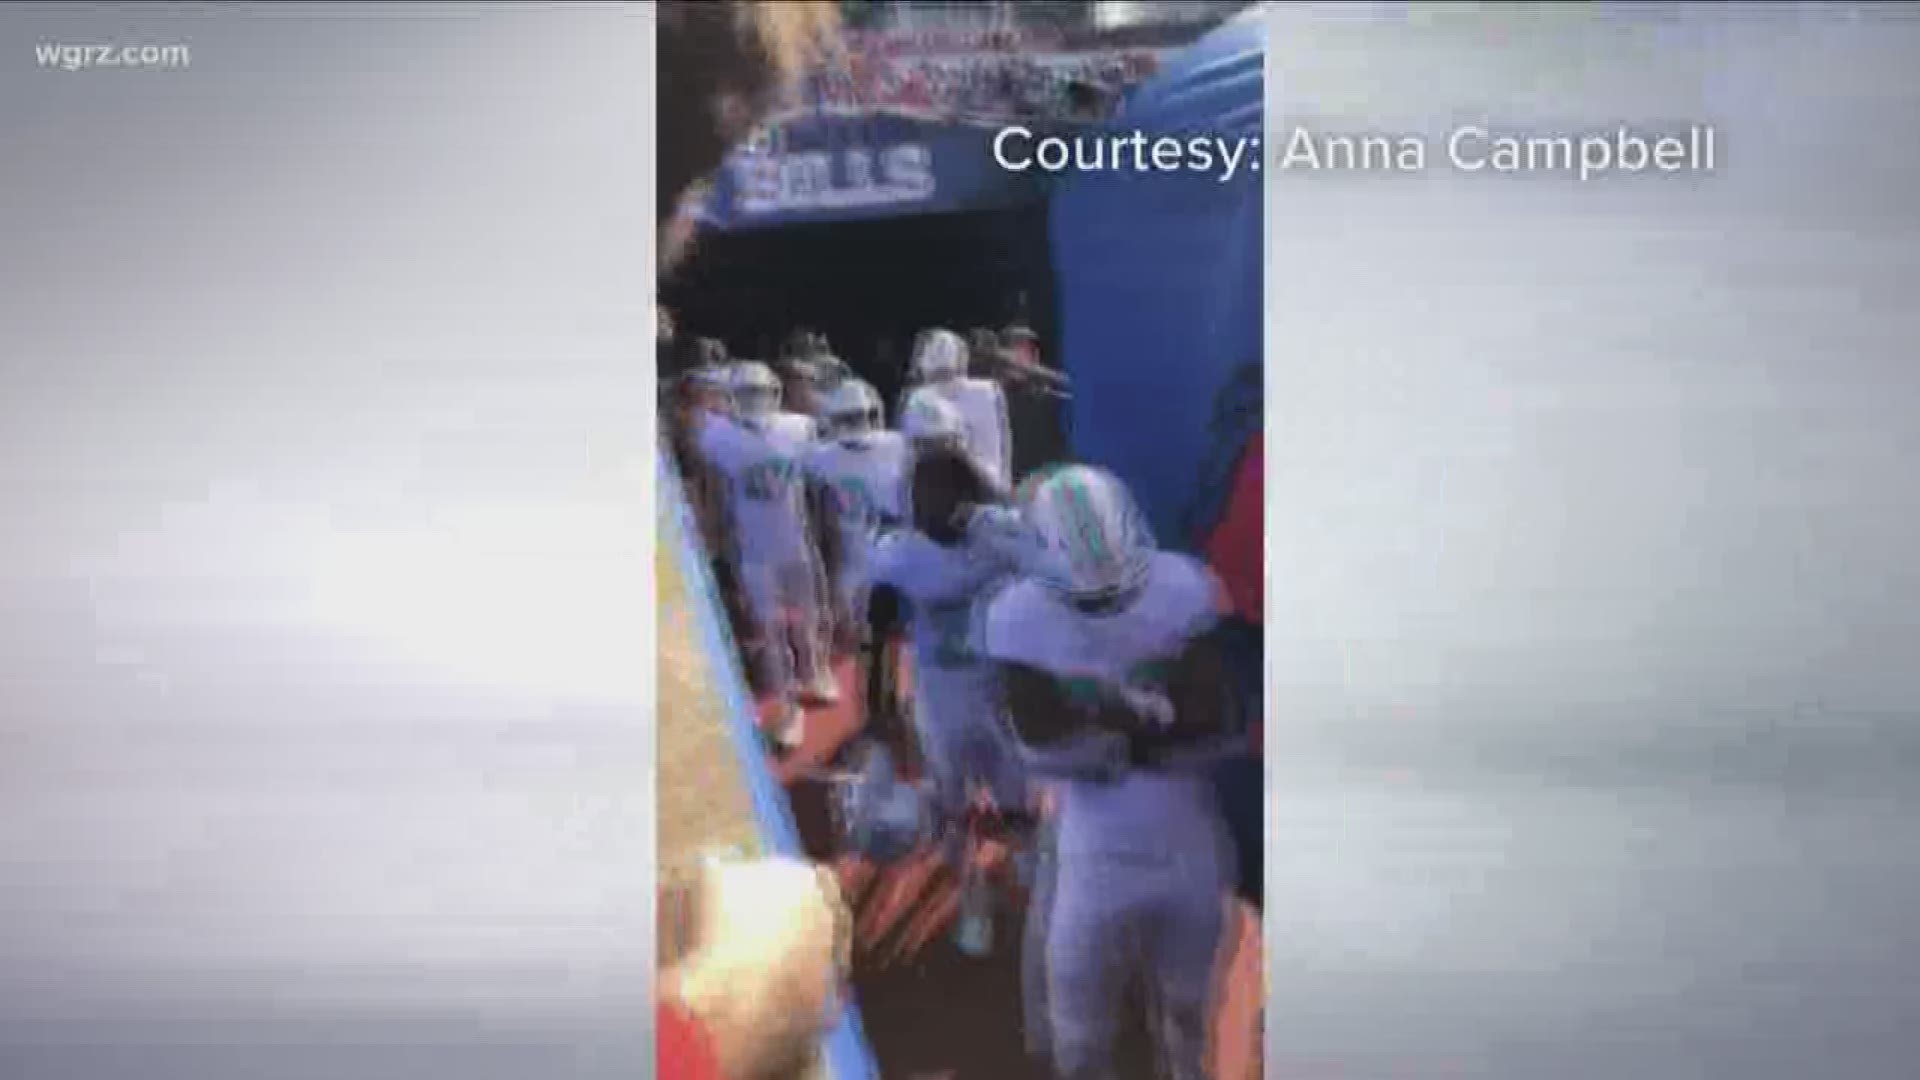 There was an altercation between a bills fan and a Miami dolphin player yesterday afternoon. The fan says the player spit on him and now there is an investigation.